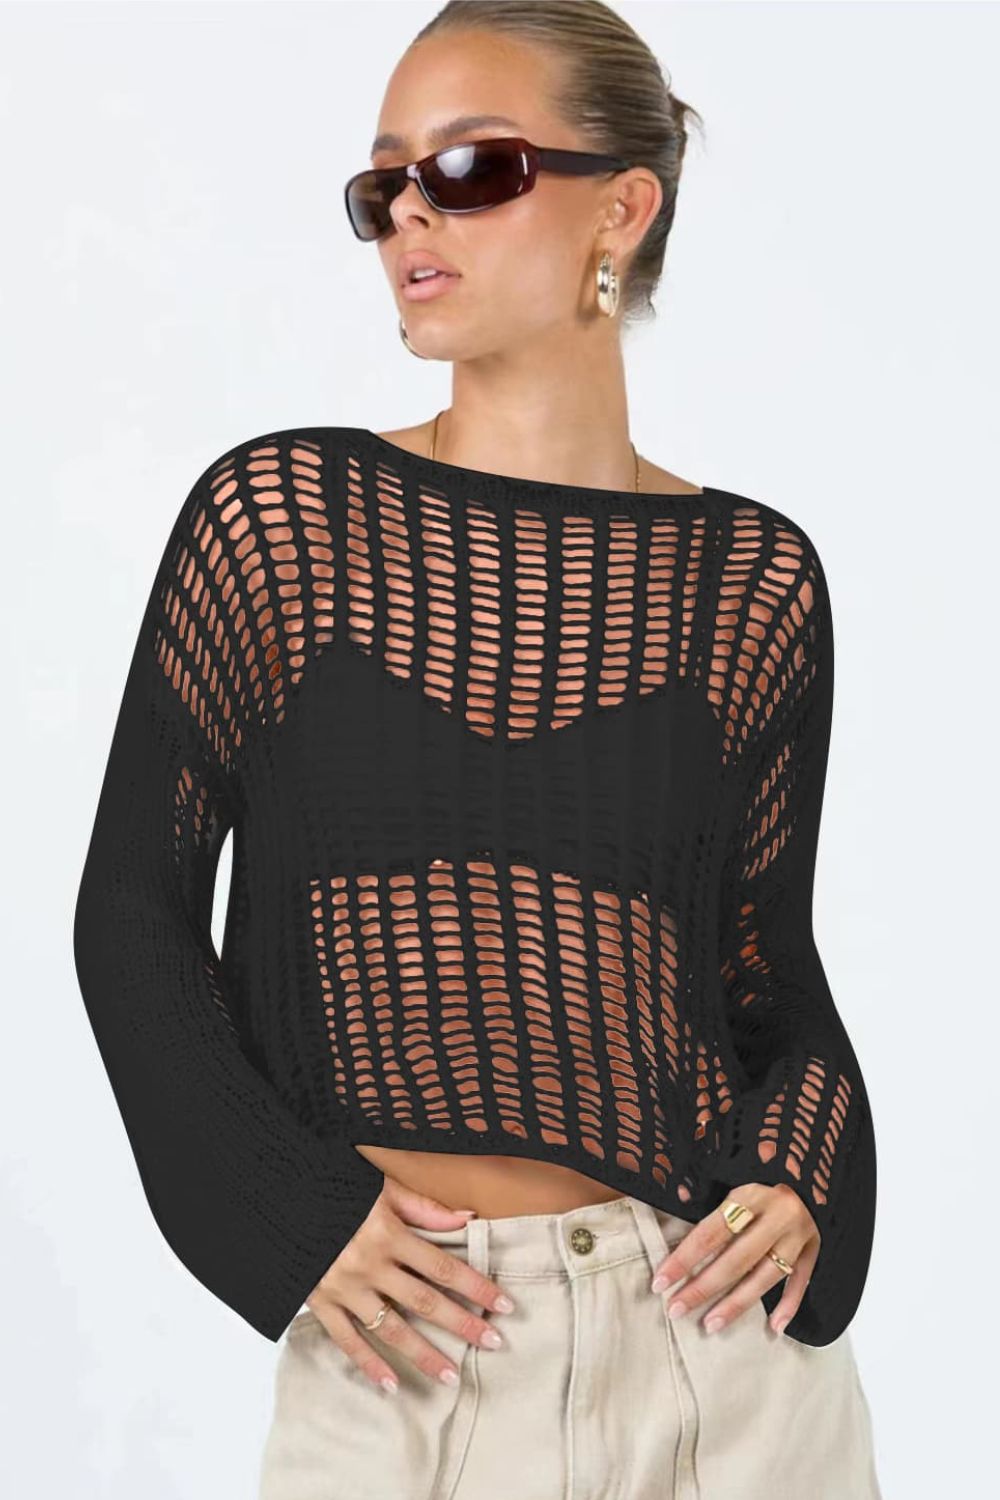 Openwork Boat Neck Long Sleeve Cover Up  Sunset and Swim Black S 